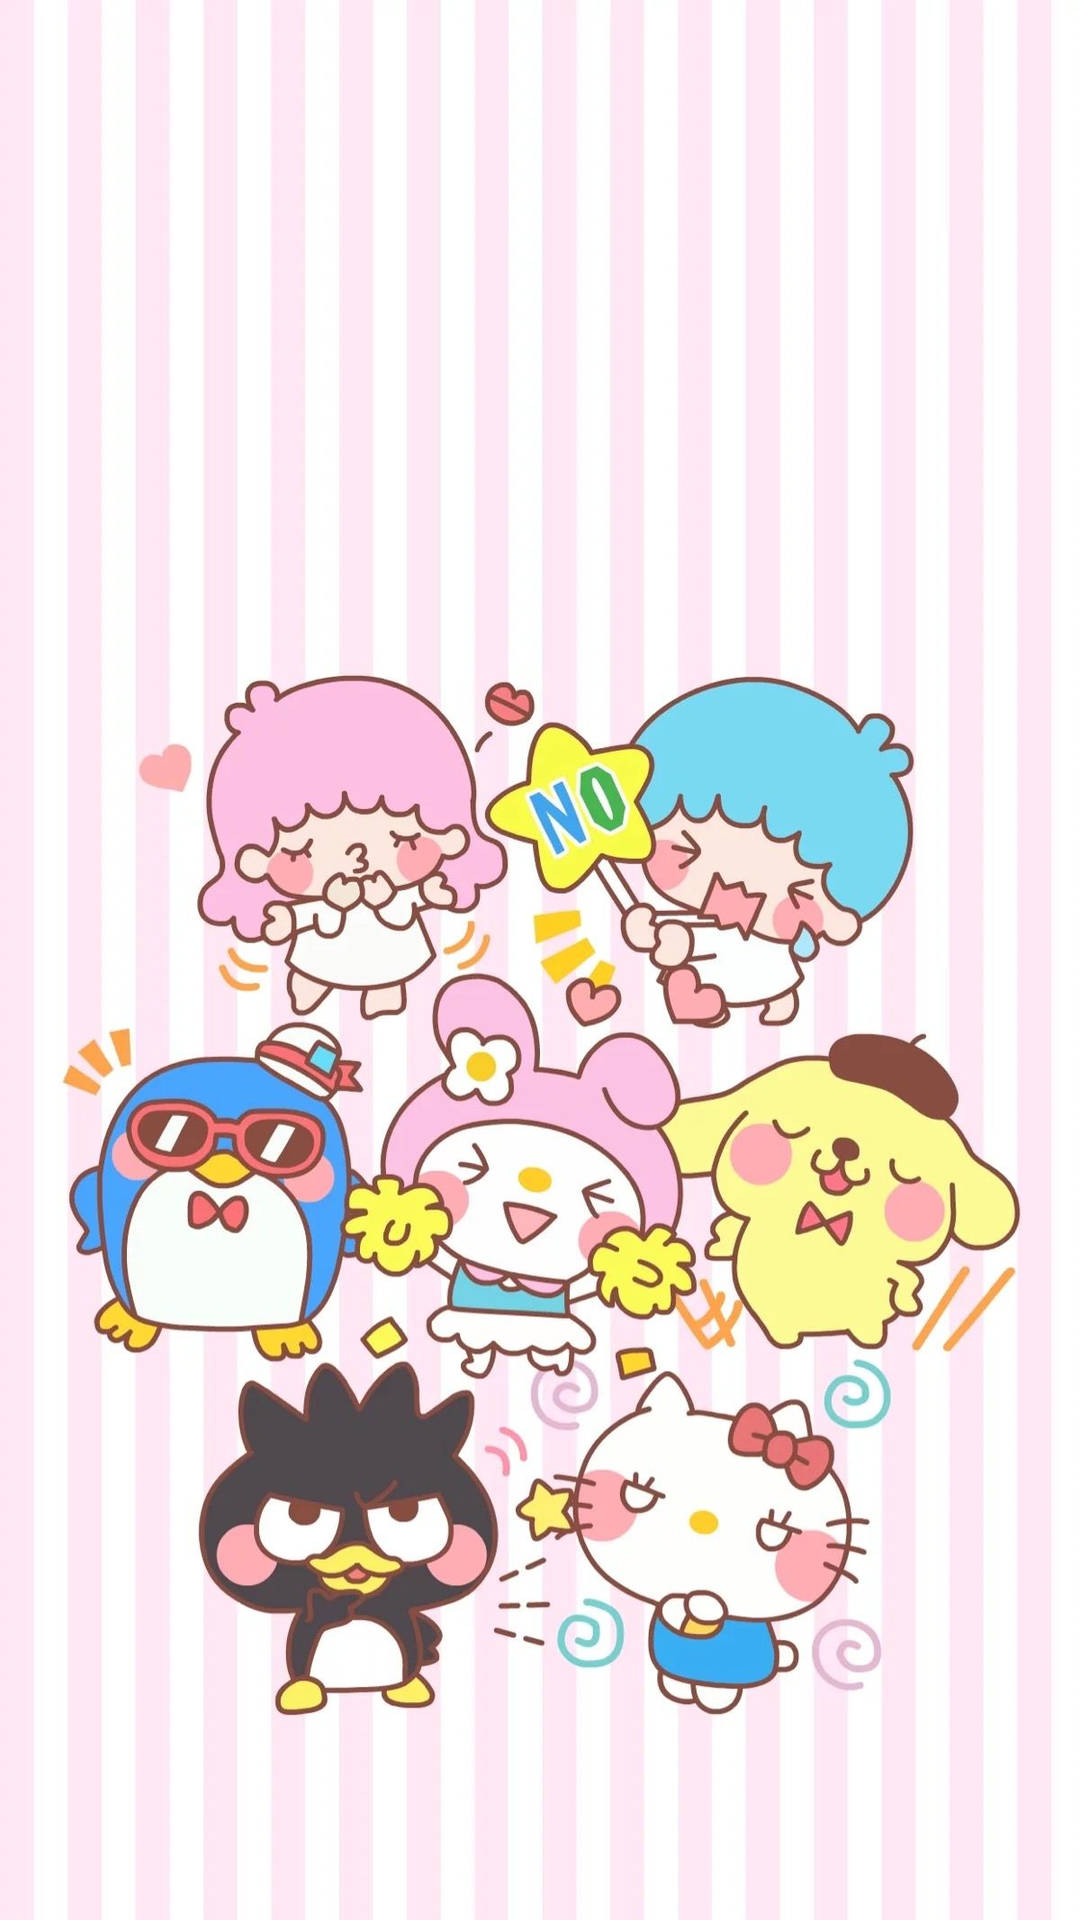 Adorable Sanrio Characters Ready to Brighten Your Day Wallpaper